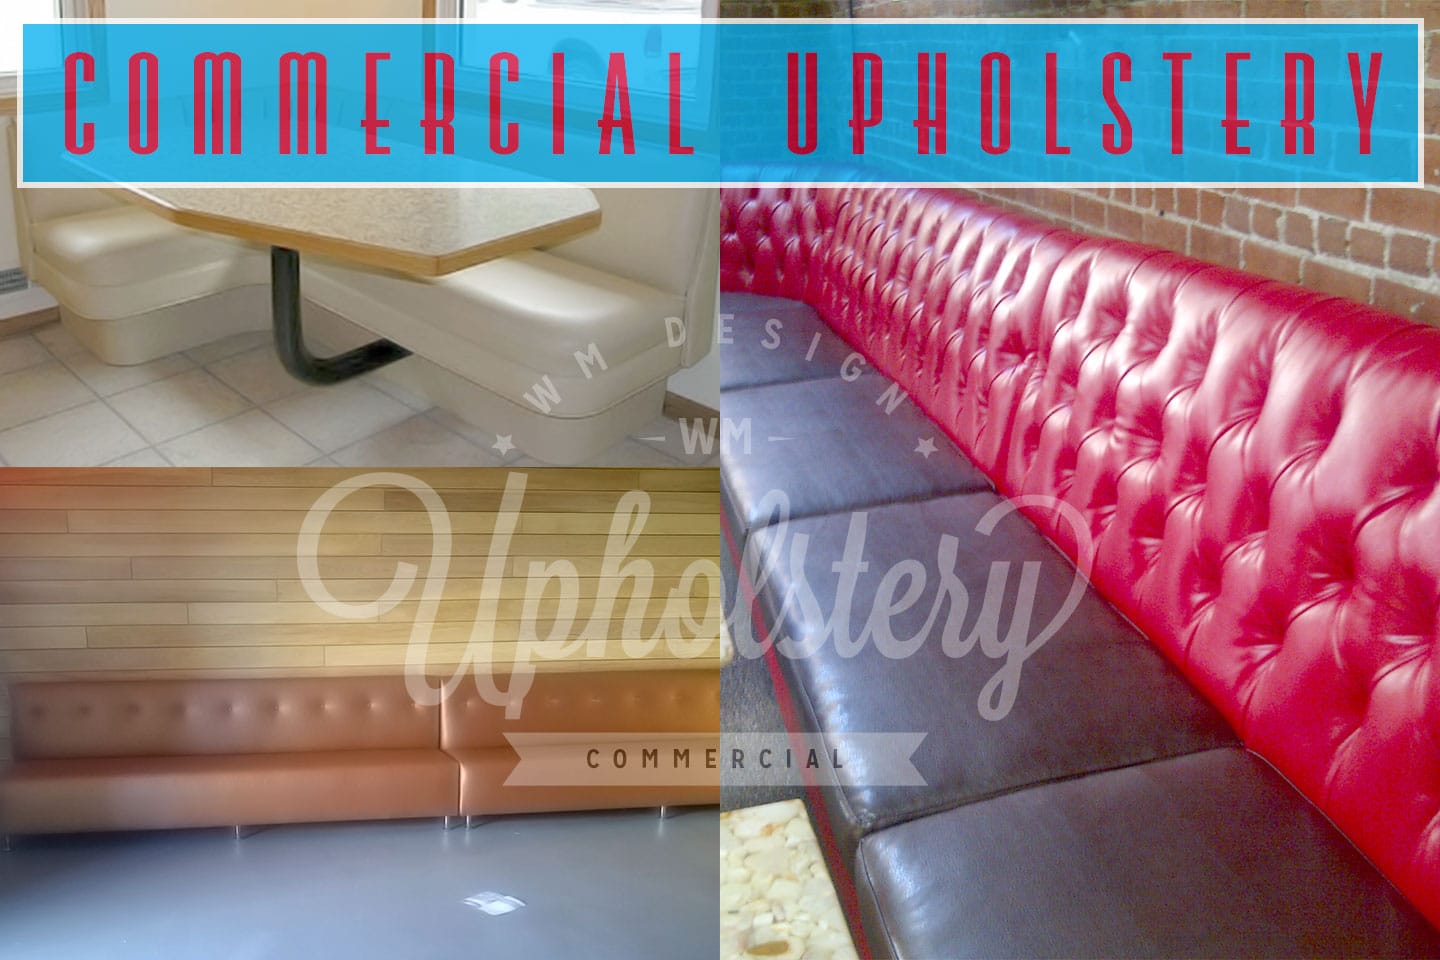 Commercial upholstery Culver City California. Hospitality sofas and chairs reupholstery in Culver City California